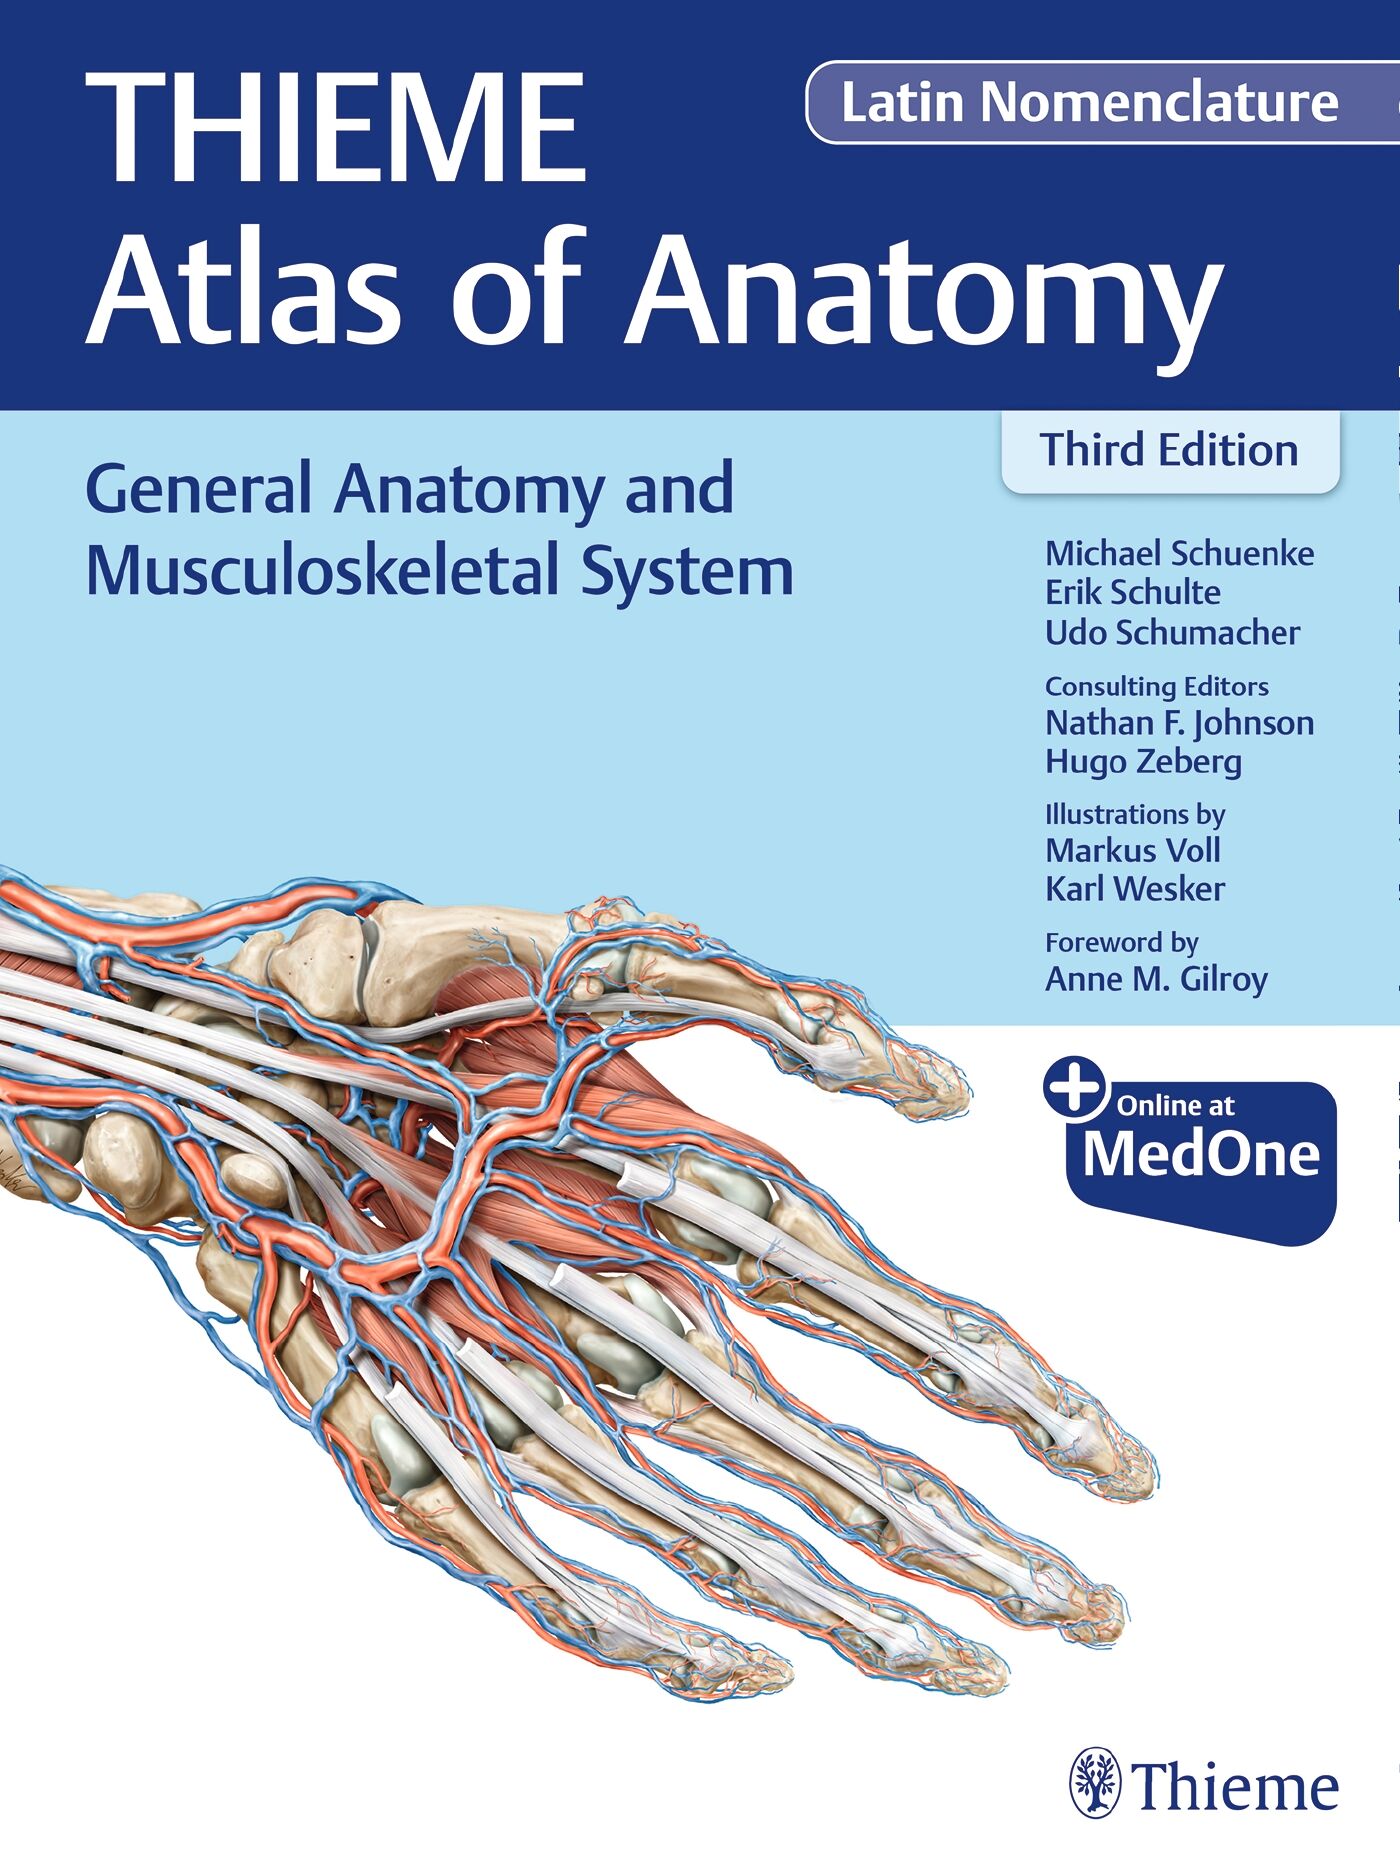 General Anatomy and Musculoskeletal System (THIEME Atlas of Anatomy), Latin Nomenclature, 9781684200849